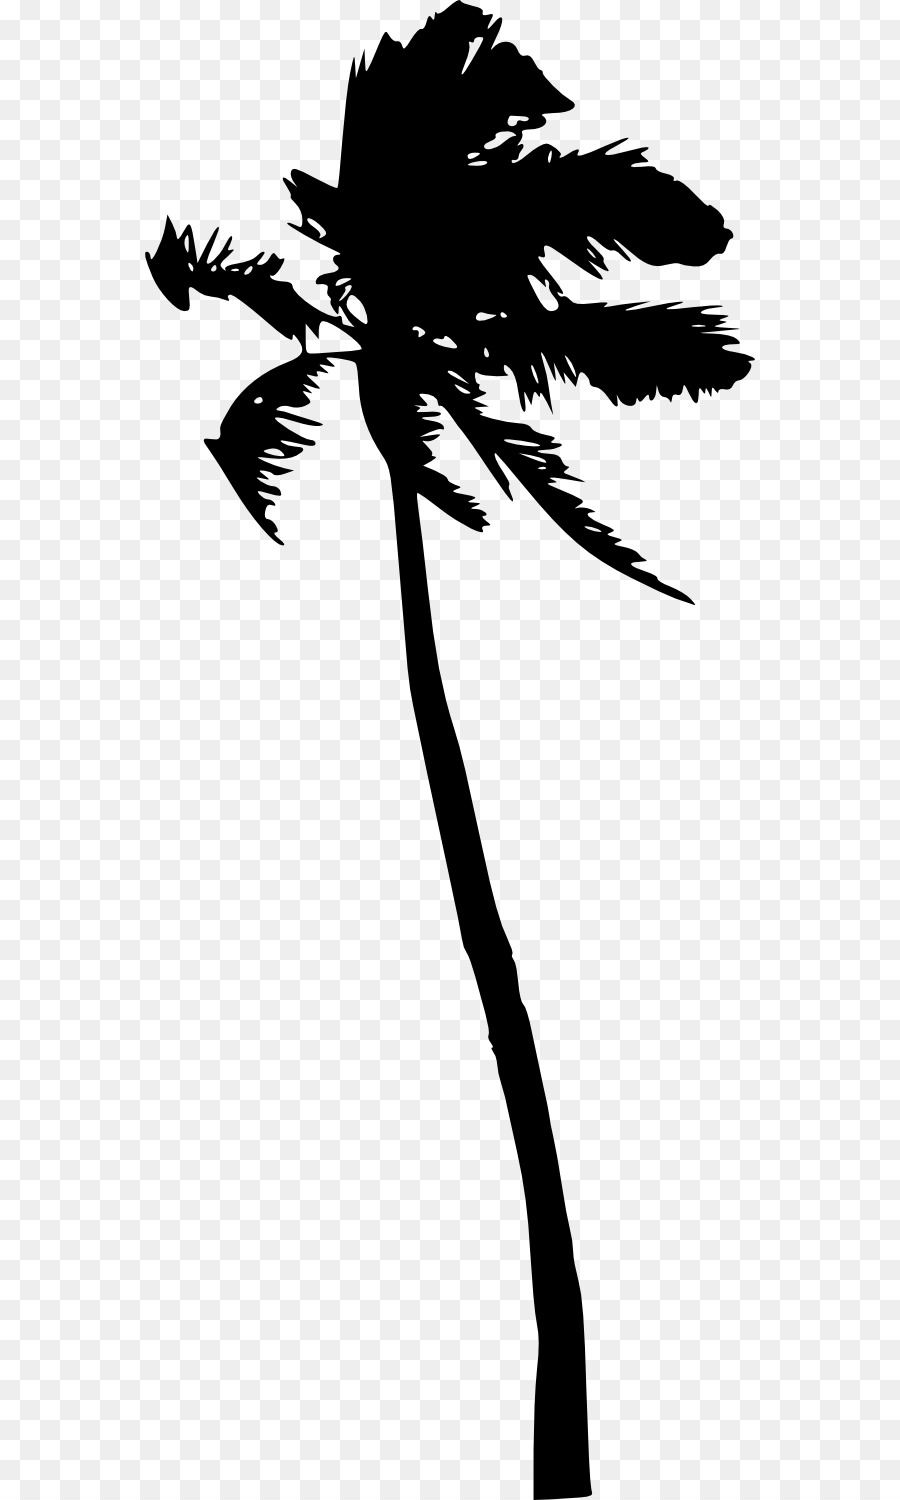 Palm trees Portable Network Graphics Silhouette Clip art Coconut -  png download - 610*1500 - Free Transparent Palm Trees png Download.